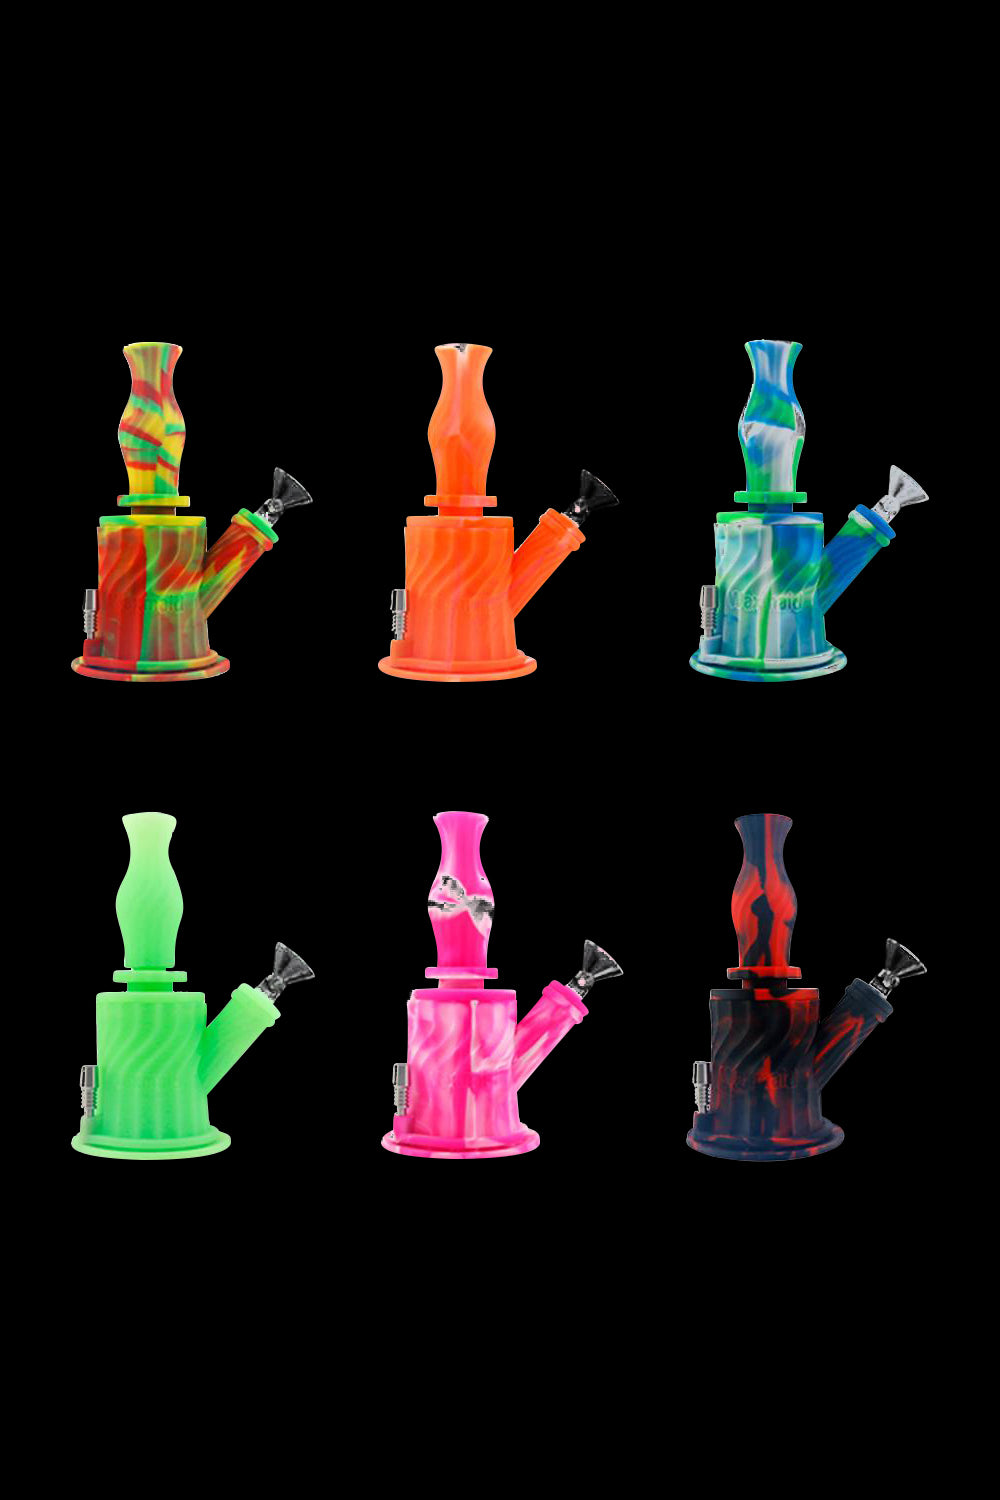 Multifunction Silicone Pipe Kits With Smoking Accessories 4.9 Inch